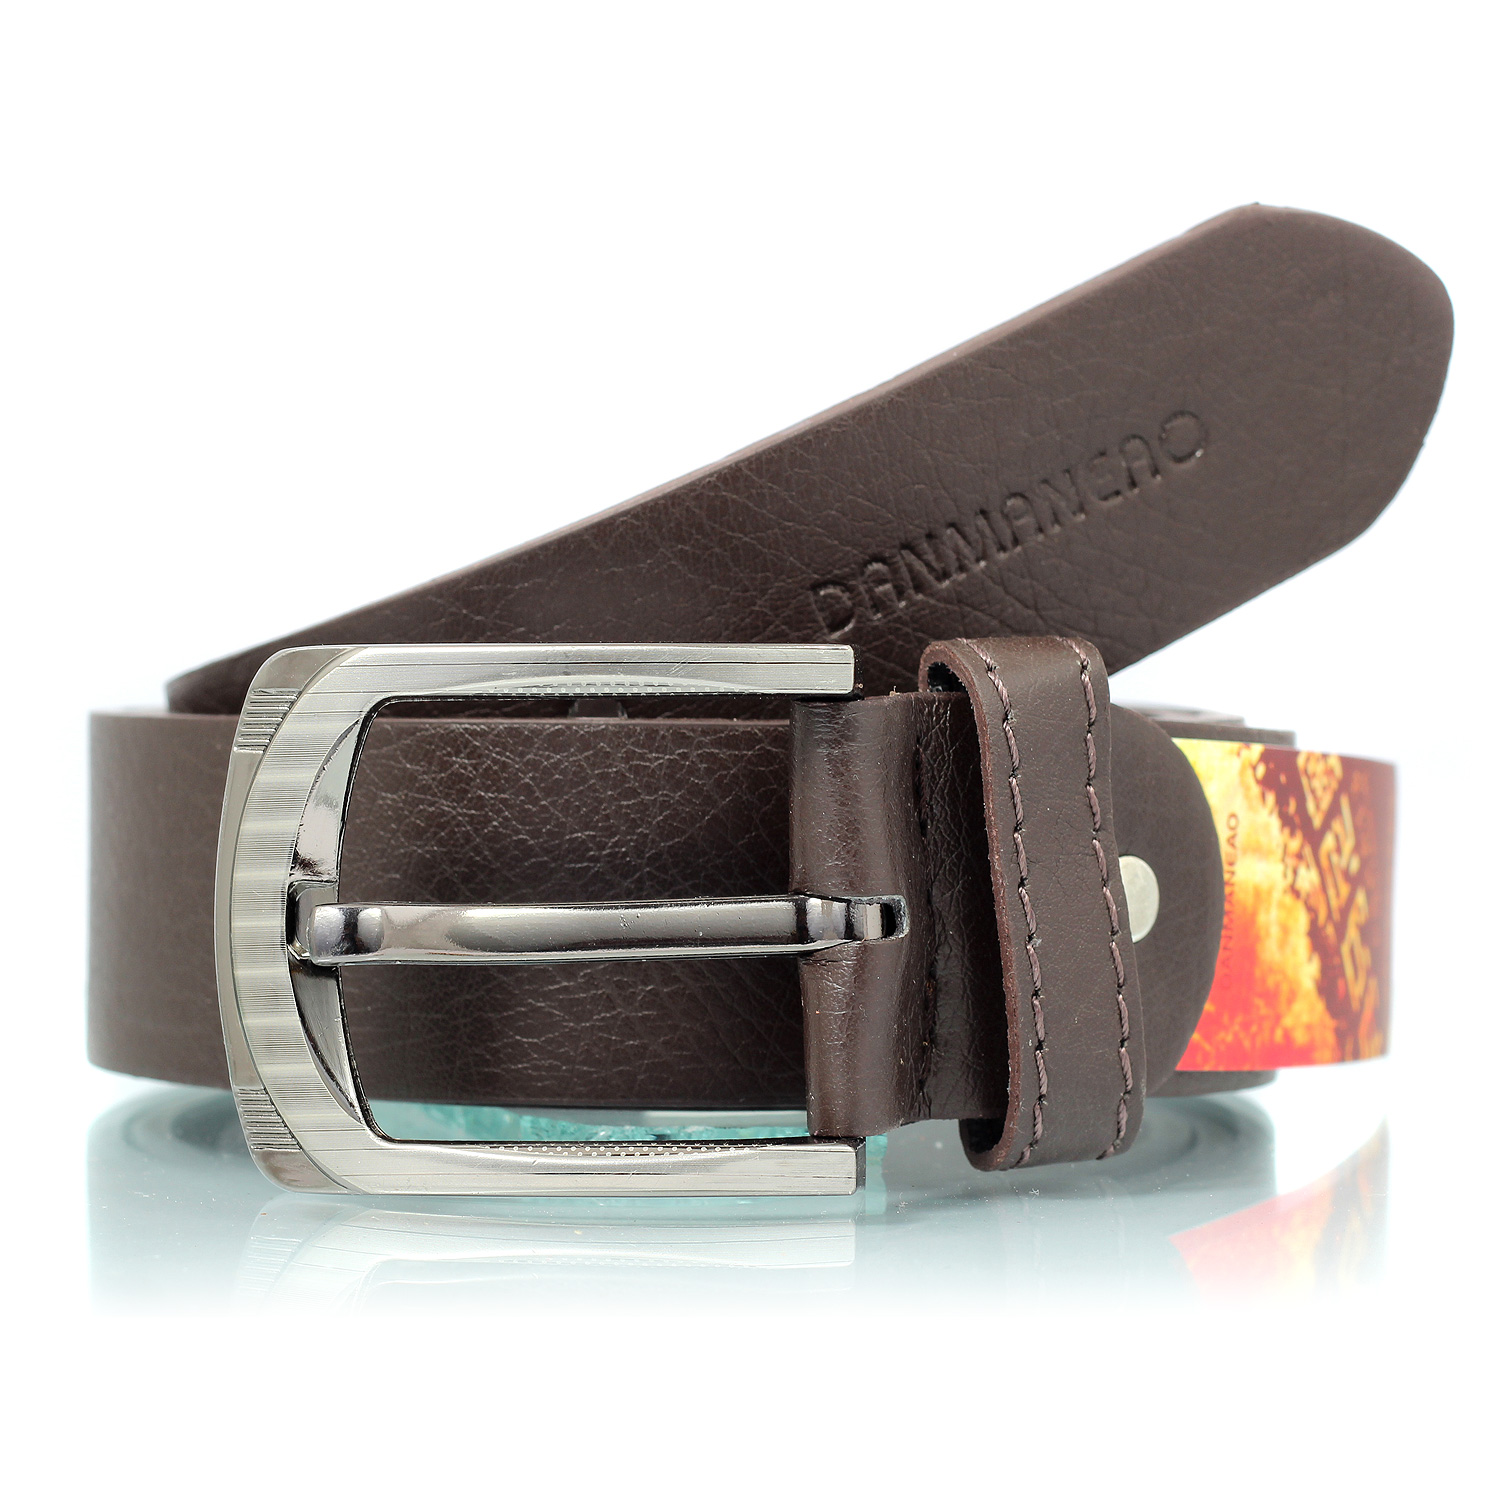 Danmaneao brown official pure Leather textured Belt